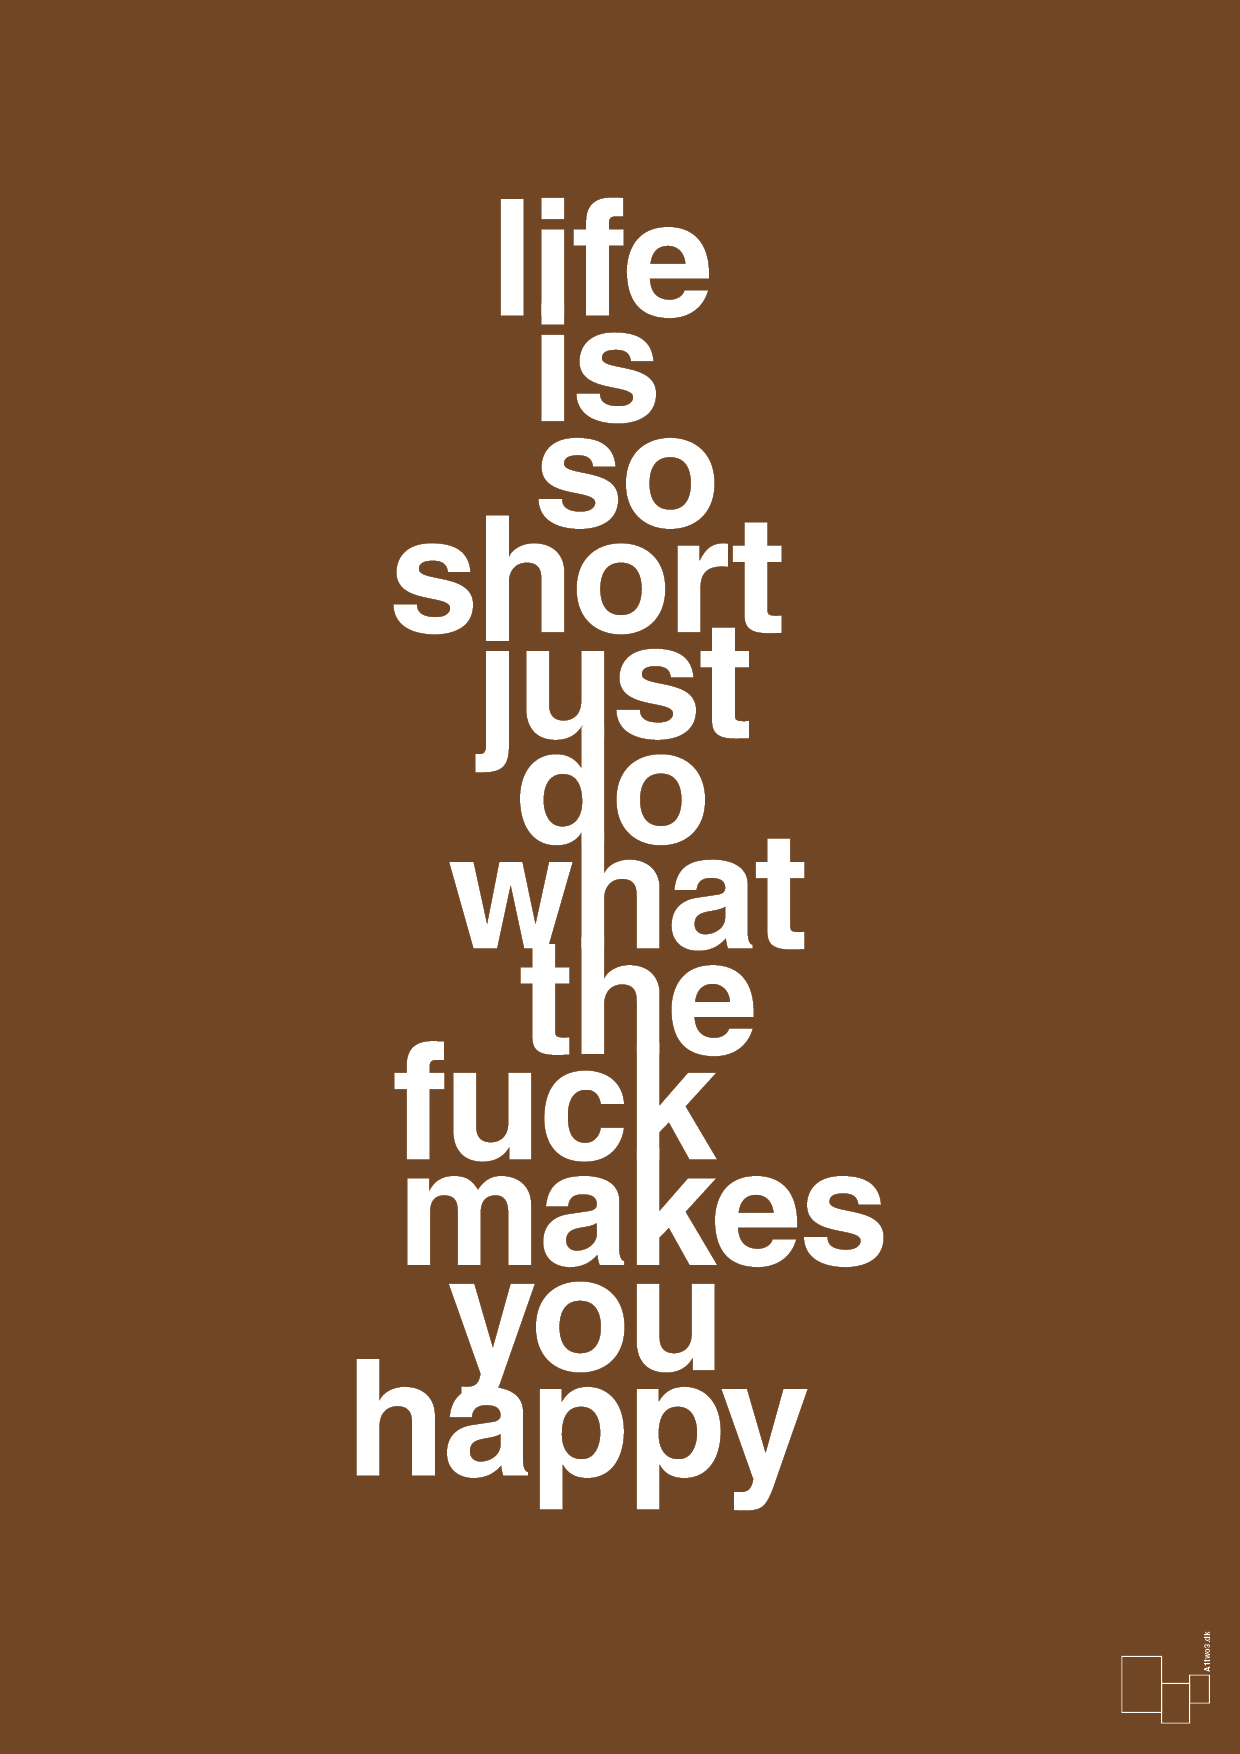 life is so short just do what the fuck makes you happy - Plakat med Ordsprog i Dark Brown